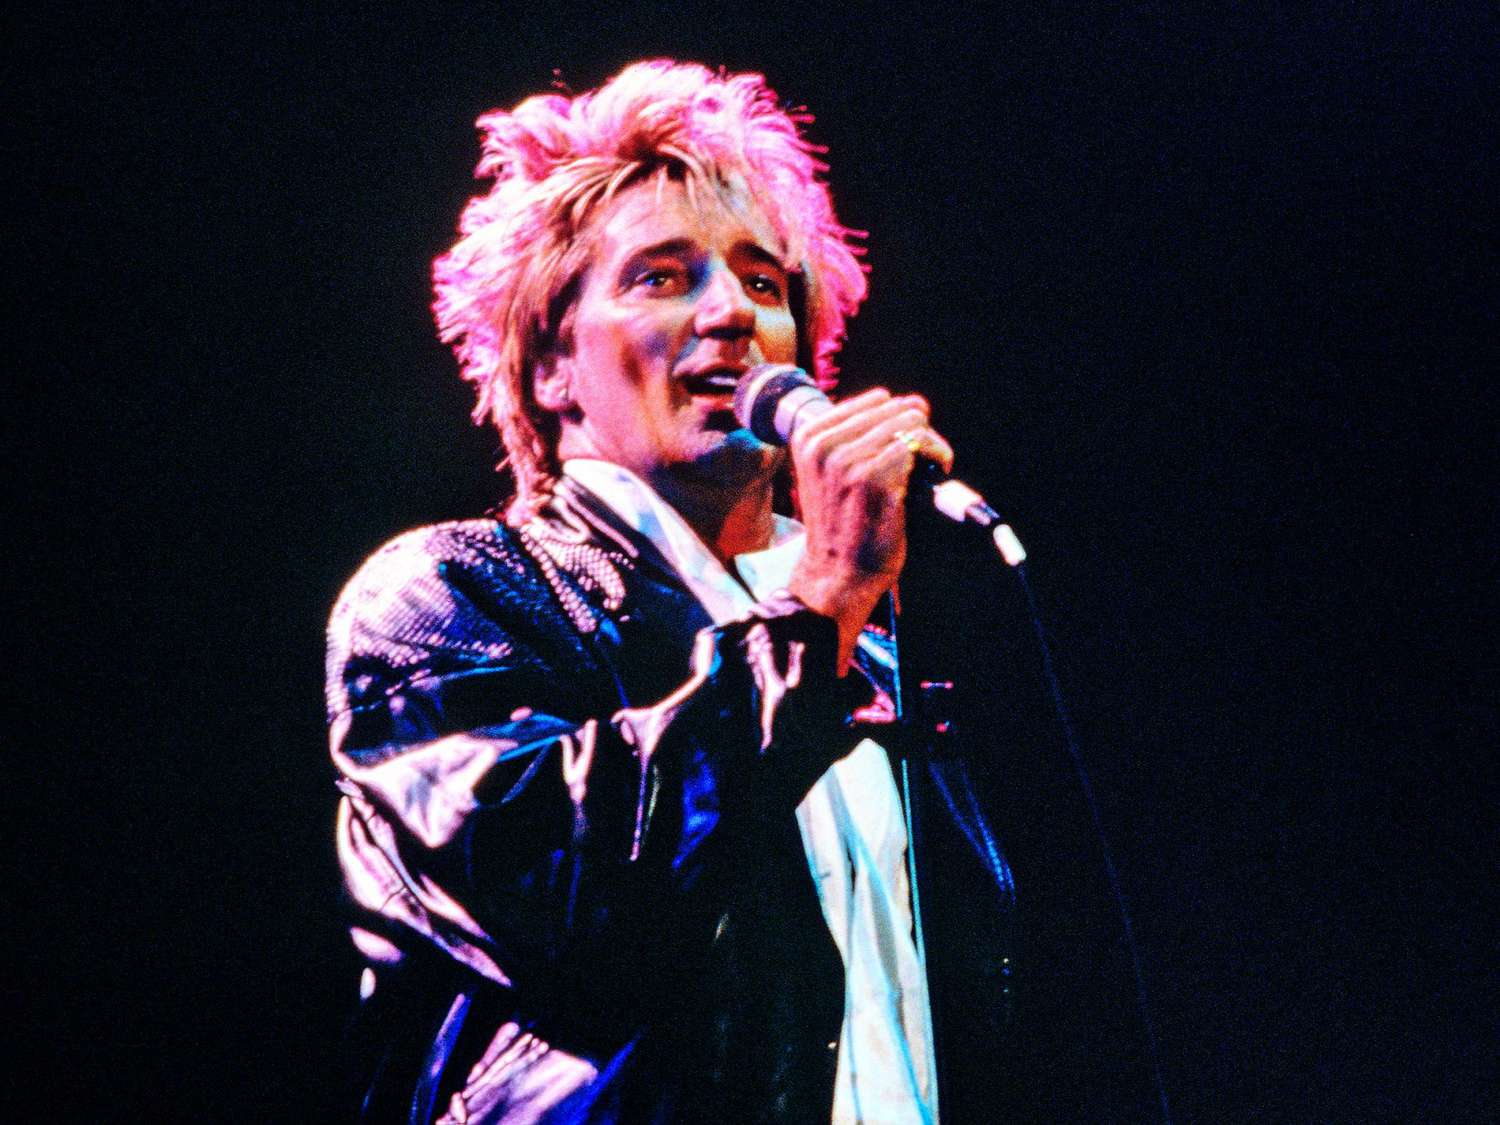 Rod Stewart at The Prince's Trust 10th Birthday Party at Wembley Arena in London&nbsp;on June 20, 1986